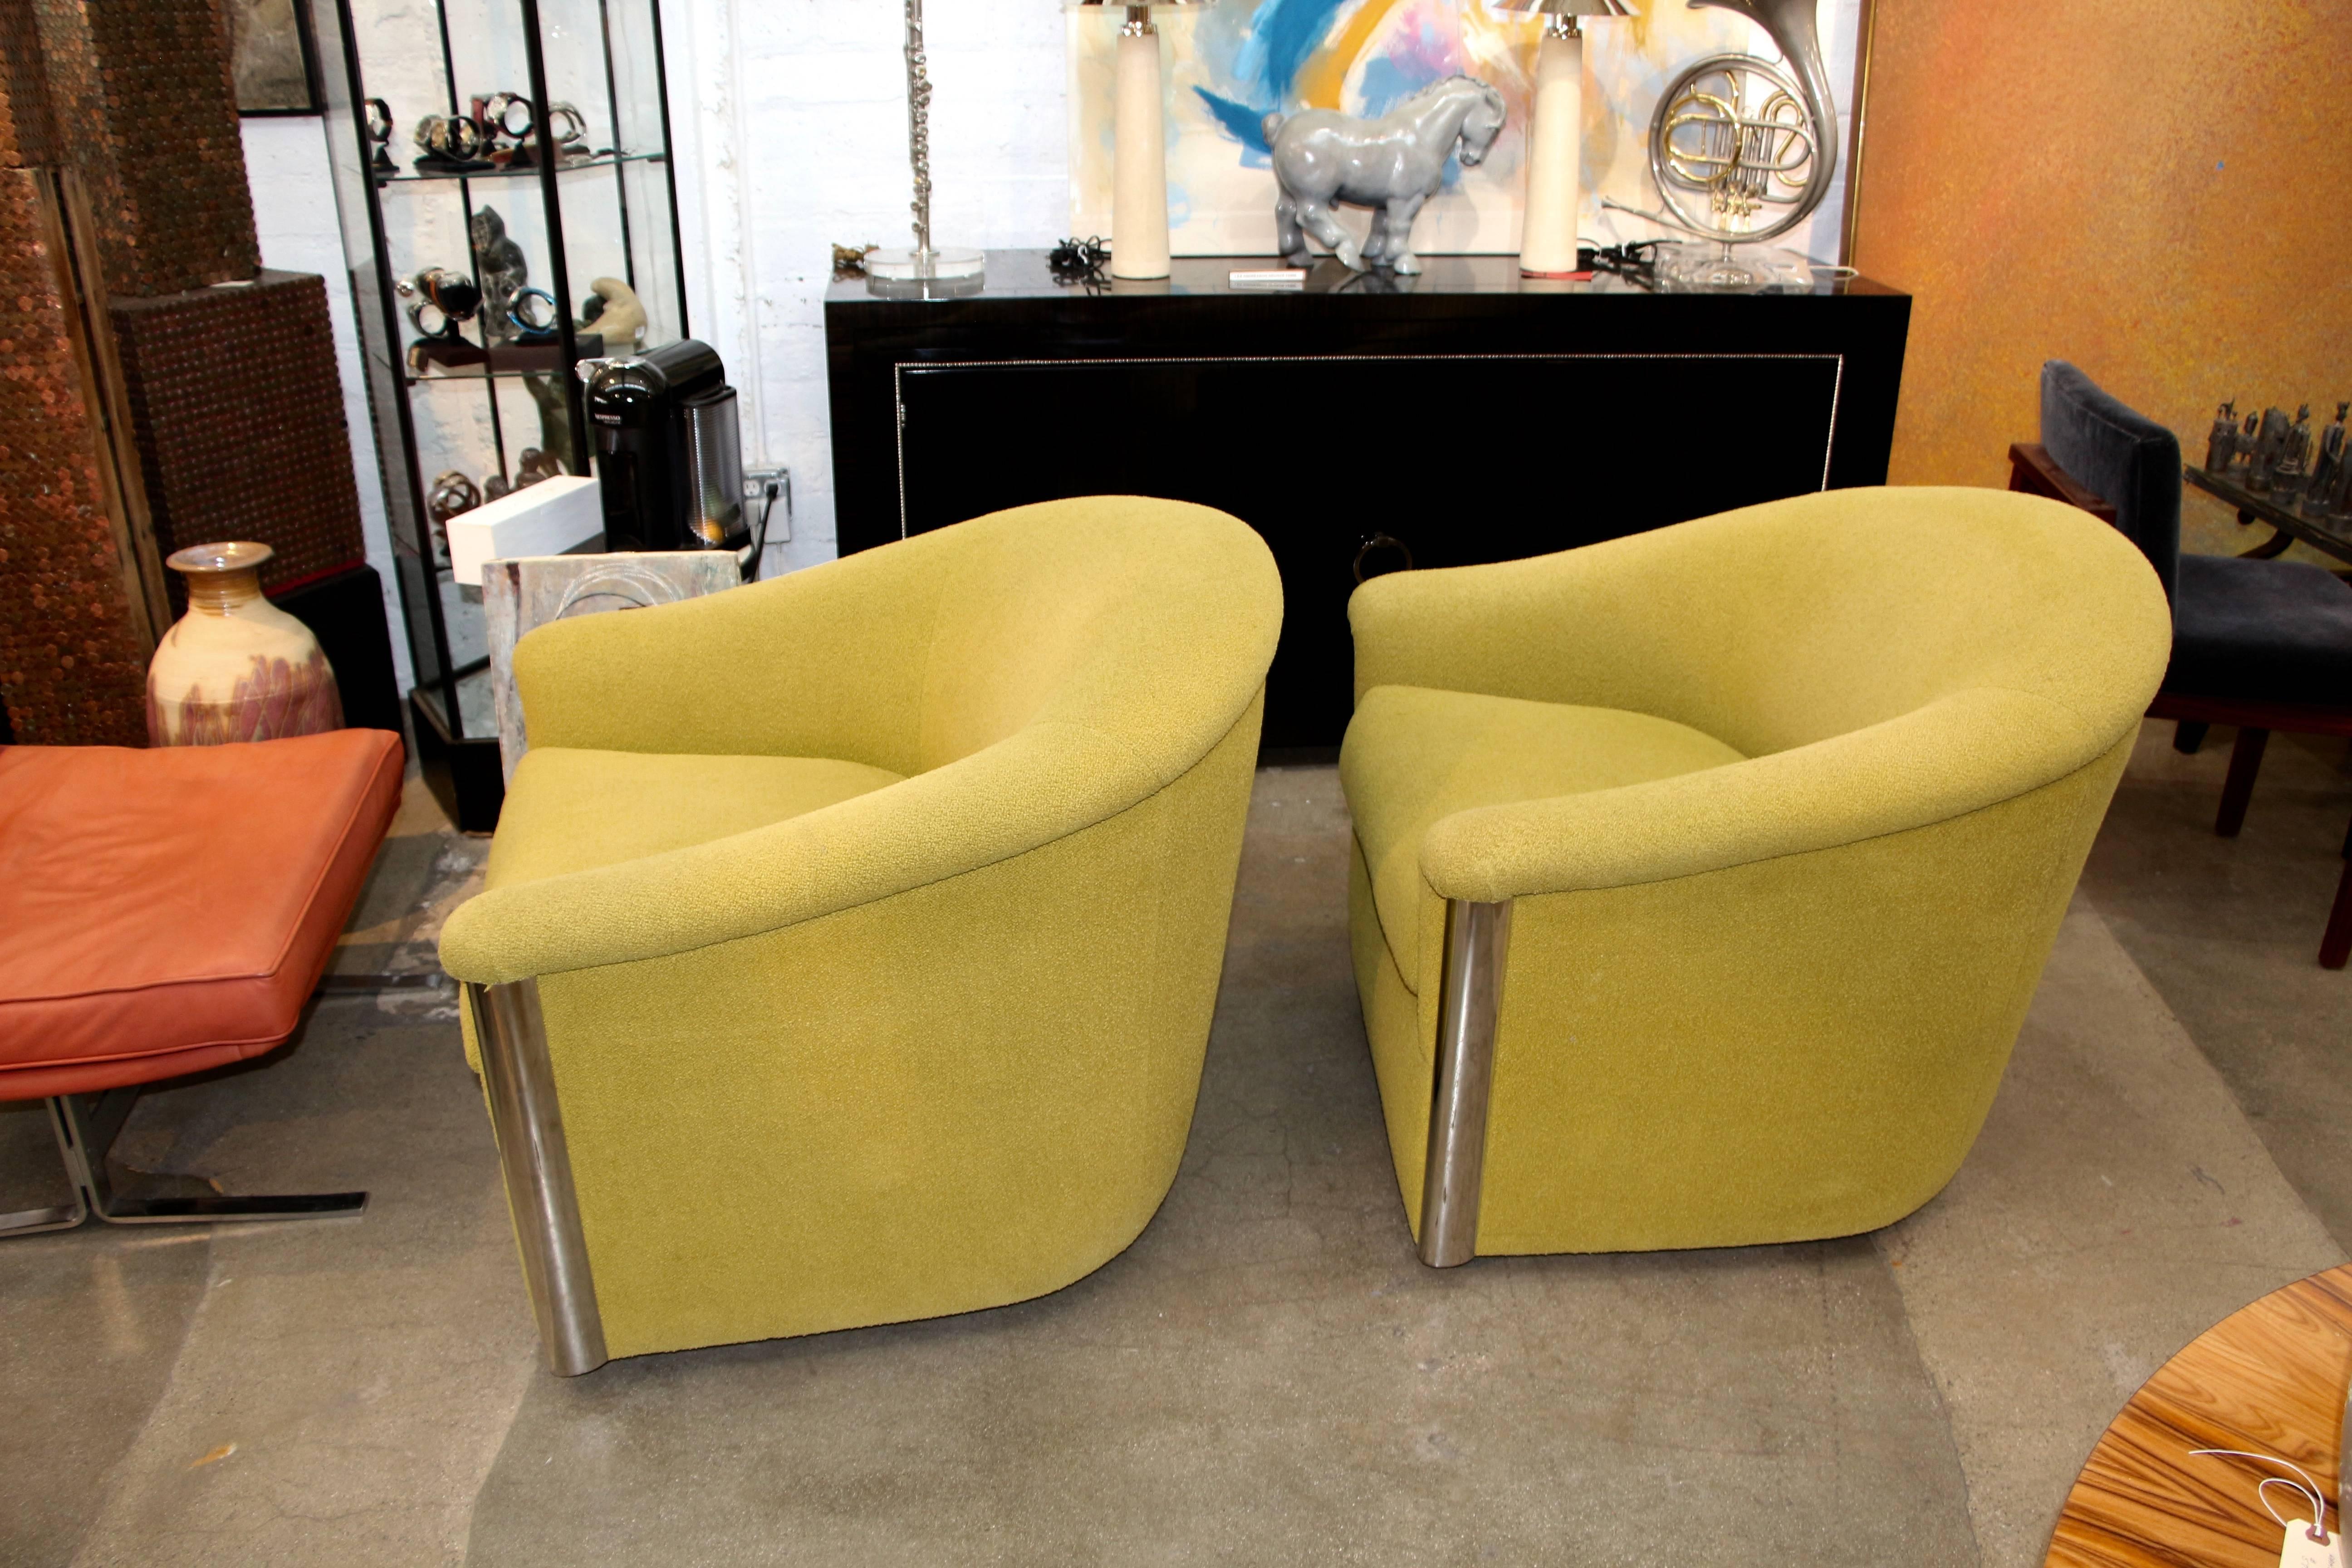 A pretty wonderful pair of chairs designed by Sally Sirkin Lewis for J. Robert Scott in a Chartreuse nubby fabric. The chairs are vice-versa chairs and so marked on the bottom. They swivel and each are on five castors. Great color, these chairs